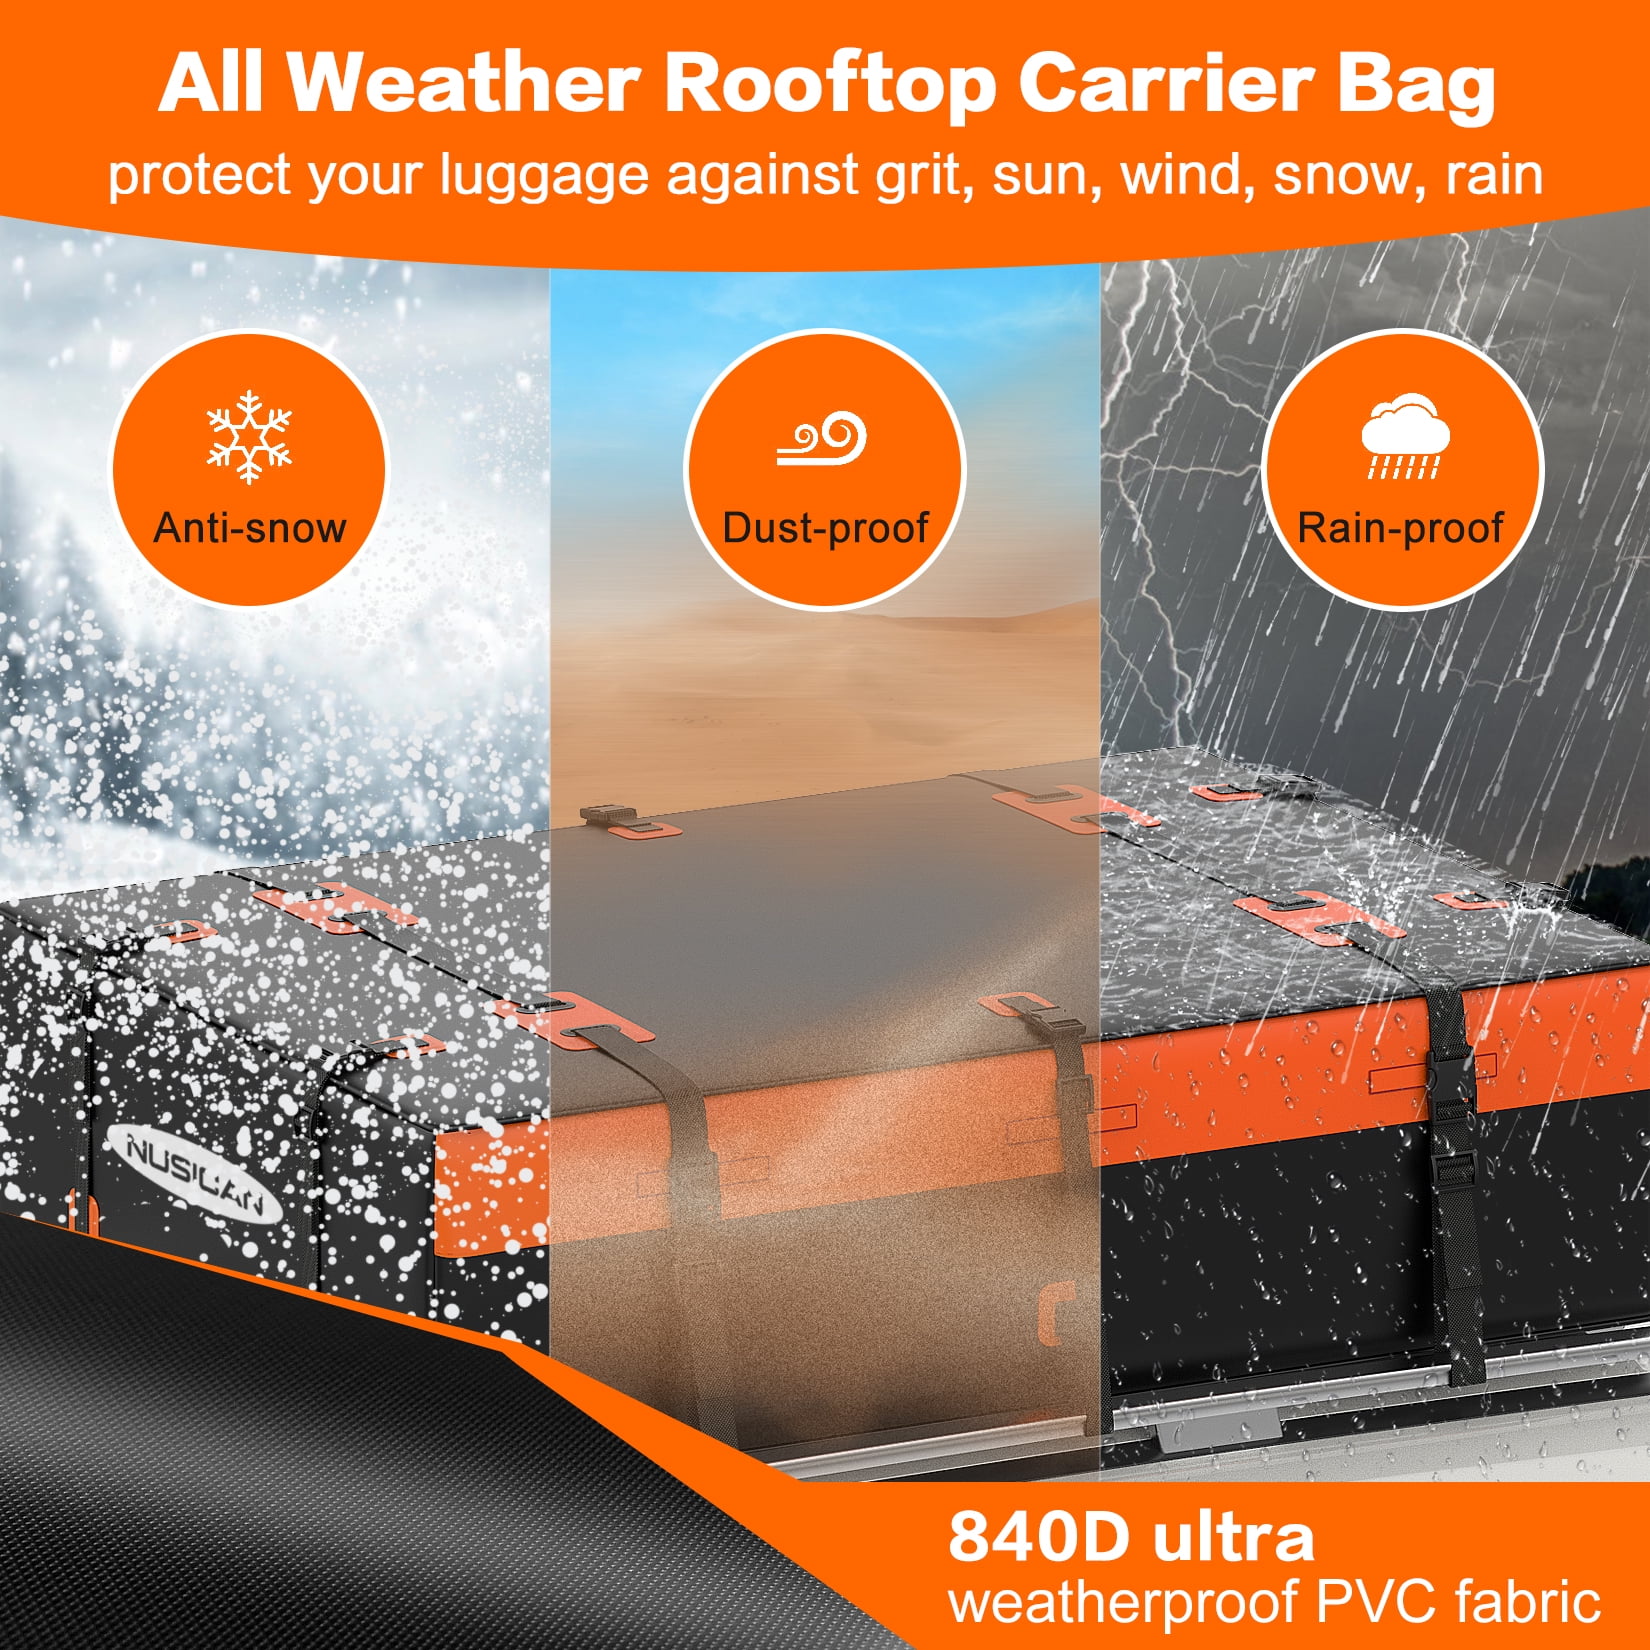 Car Rooftop Cargo Carrier Bag NUSICAN 21 Cubic Feet Waterproof Rooftop Luggage Bag for All Vehicles with/Without Racks 6 Door Hooks Included with Storage Bag&Anti-Slip Mat Anti-Tear 840D PVC 